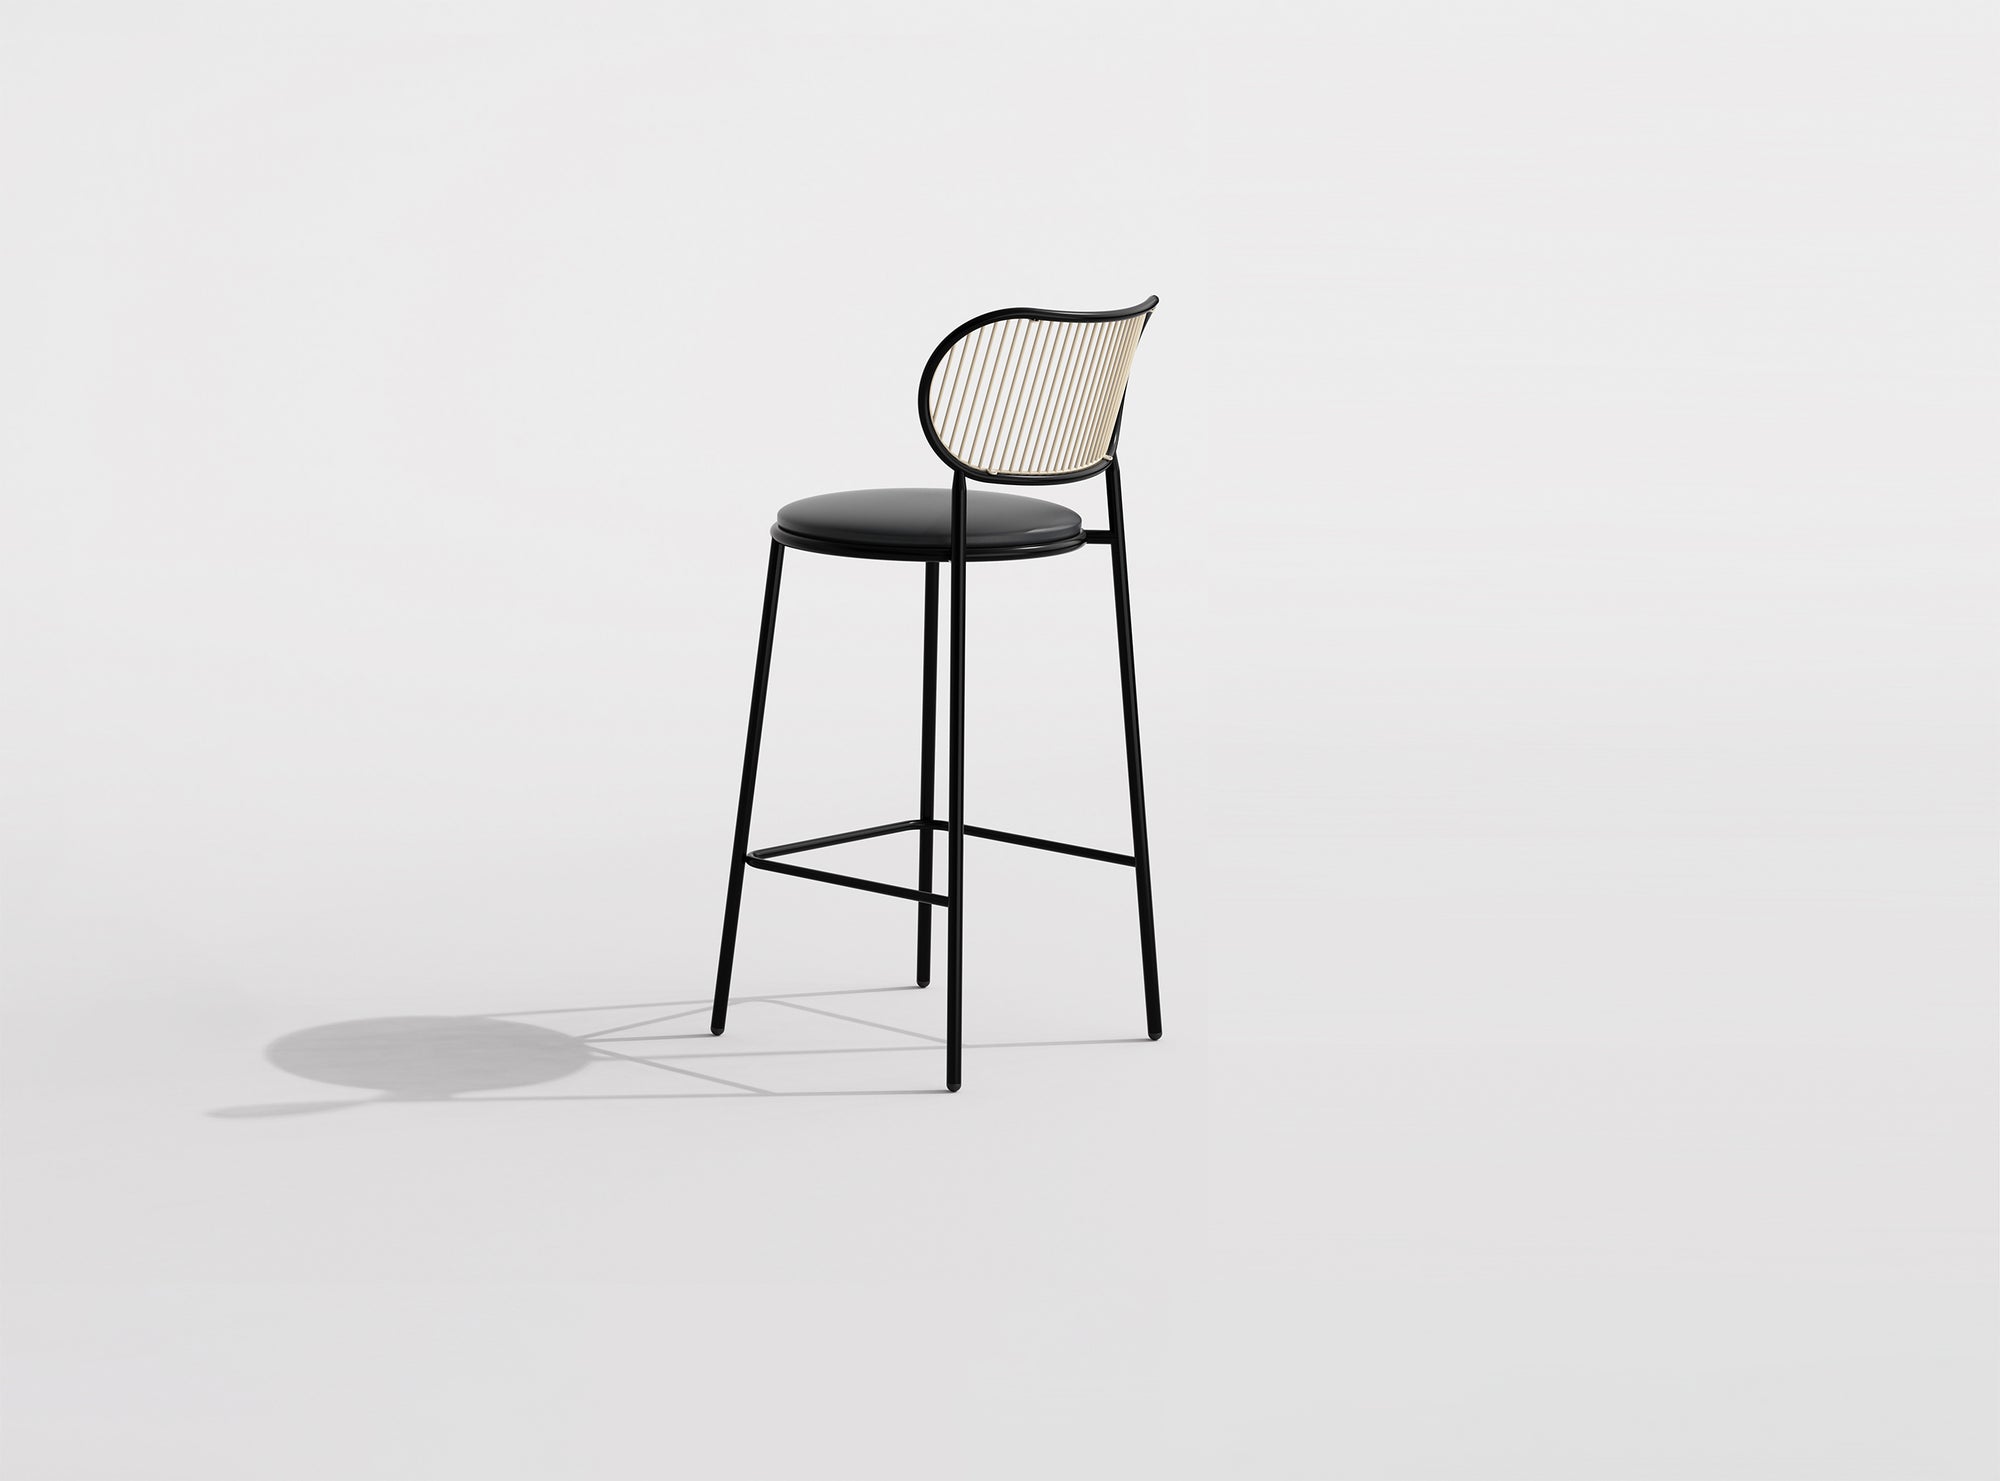 Piper Bar Counter Chair Upholstered | Fabric or Leather Seat | Designed by GibsonKarlo | DesignByThem